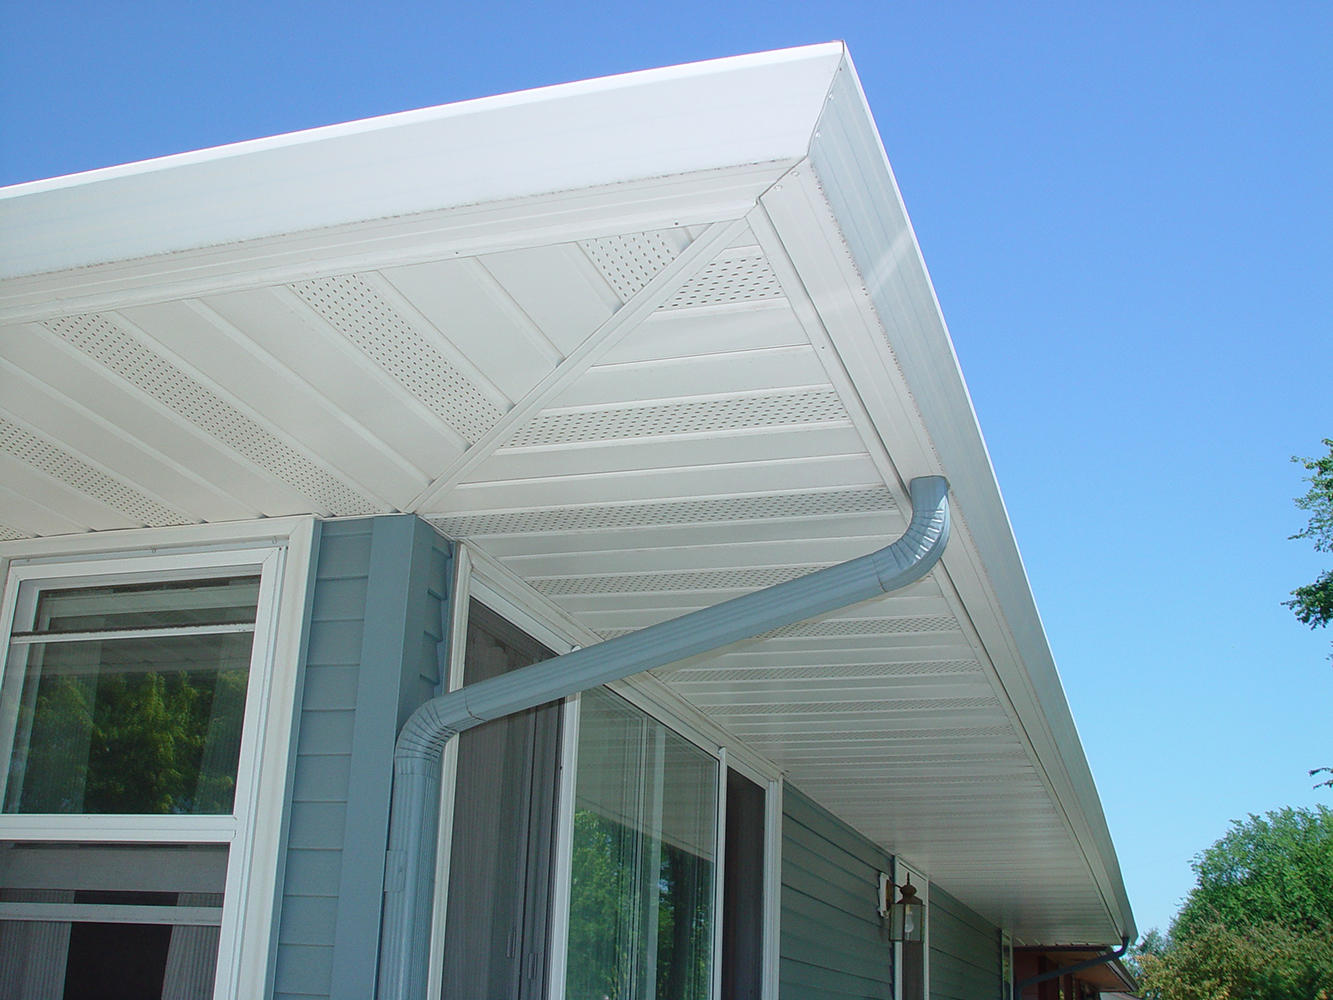 A well-designed gutter system will reduce and eliminate water and ice issues around your home surfaces, greenery and foundation by carrying the rain water away for manageable drainage. ABC Seamless Siding, Gutters and Windows can match and cover your overhang to eliminate difficult painting and upgrade your home's appearance.